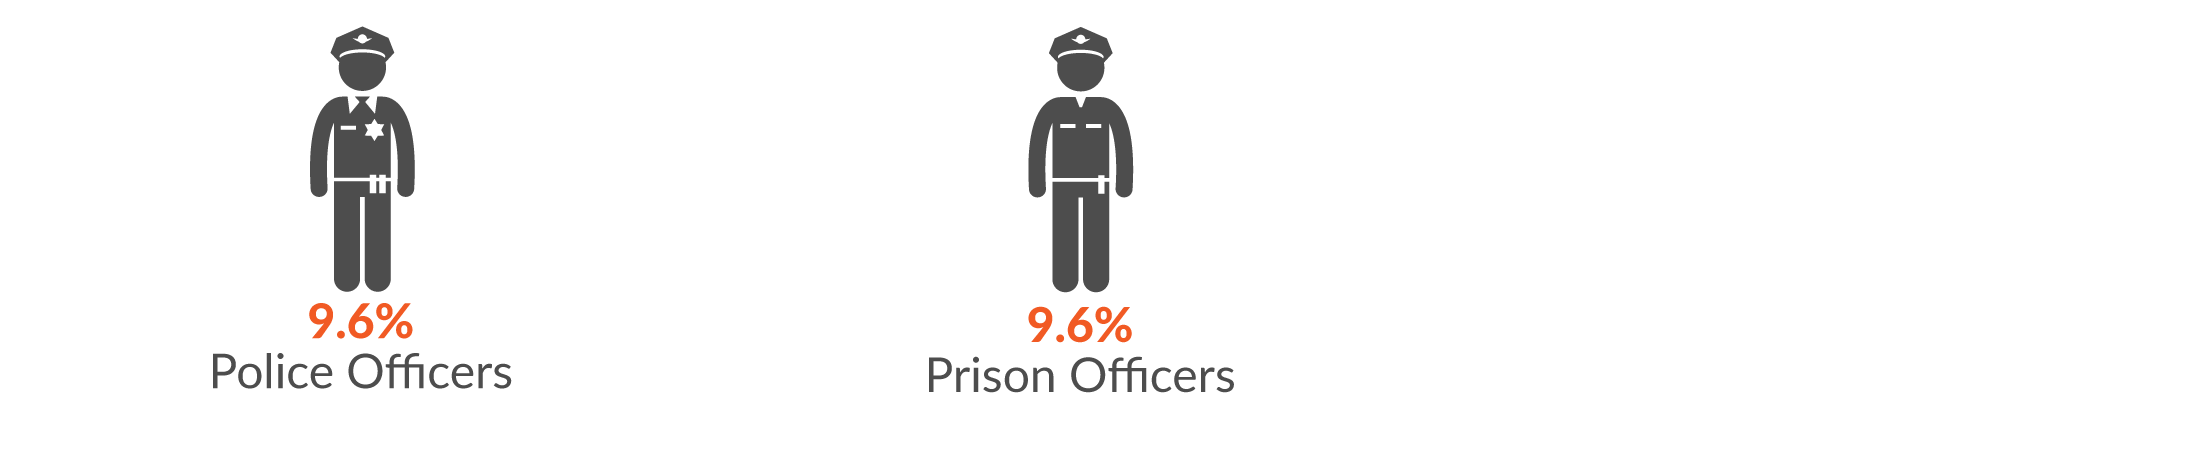 This infographic shows the main occupations by serious injury claims. 9.6% of Government administration & defence serious injury claims were made by Police Officers and 9.6% from Prison Officers as well.